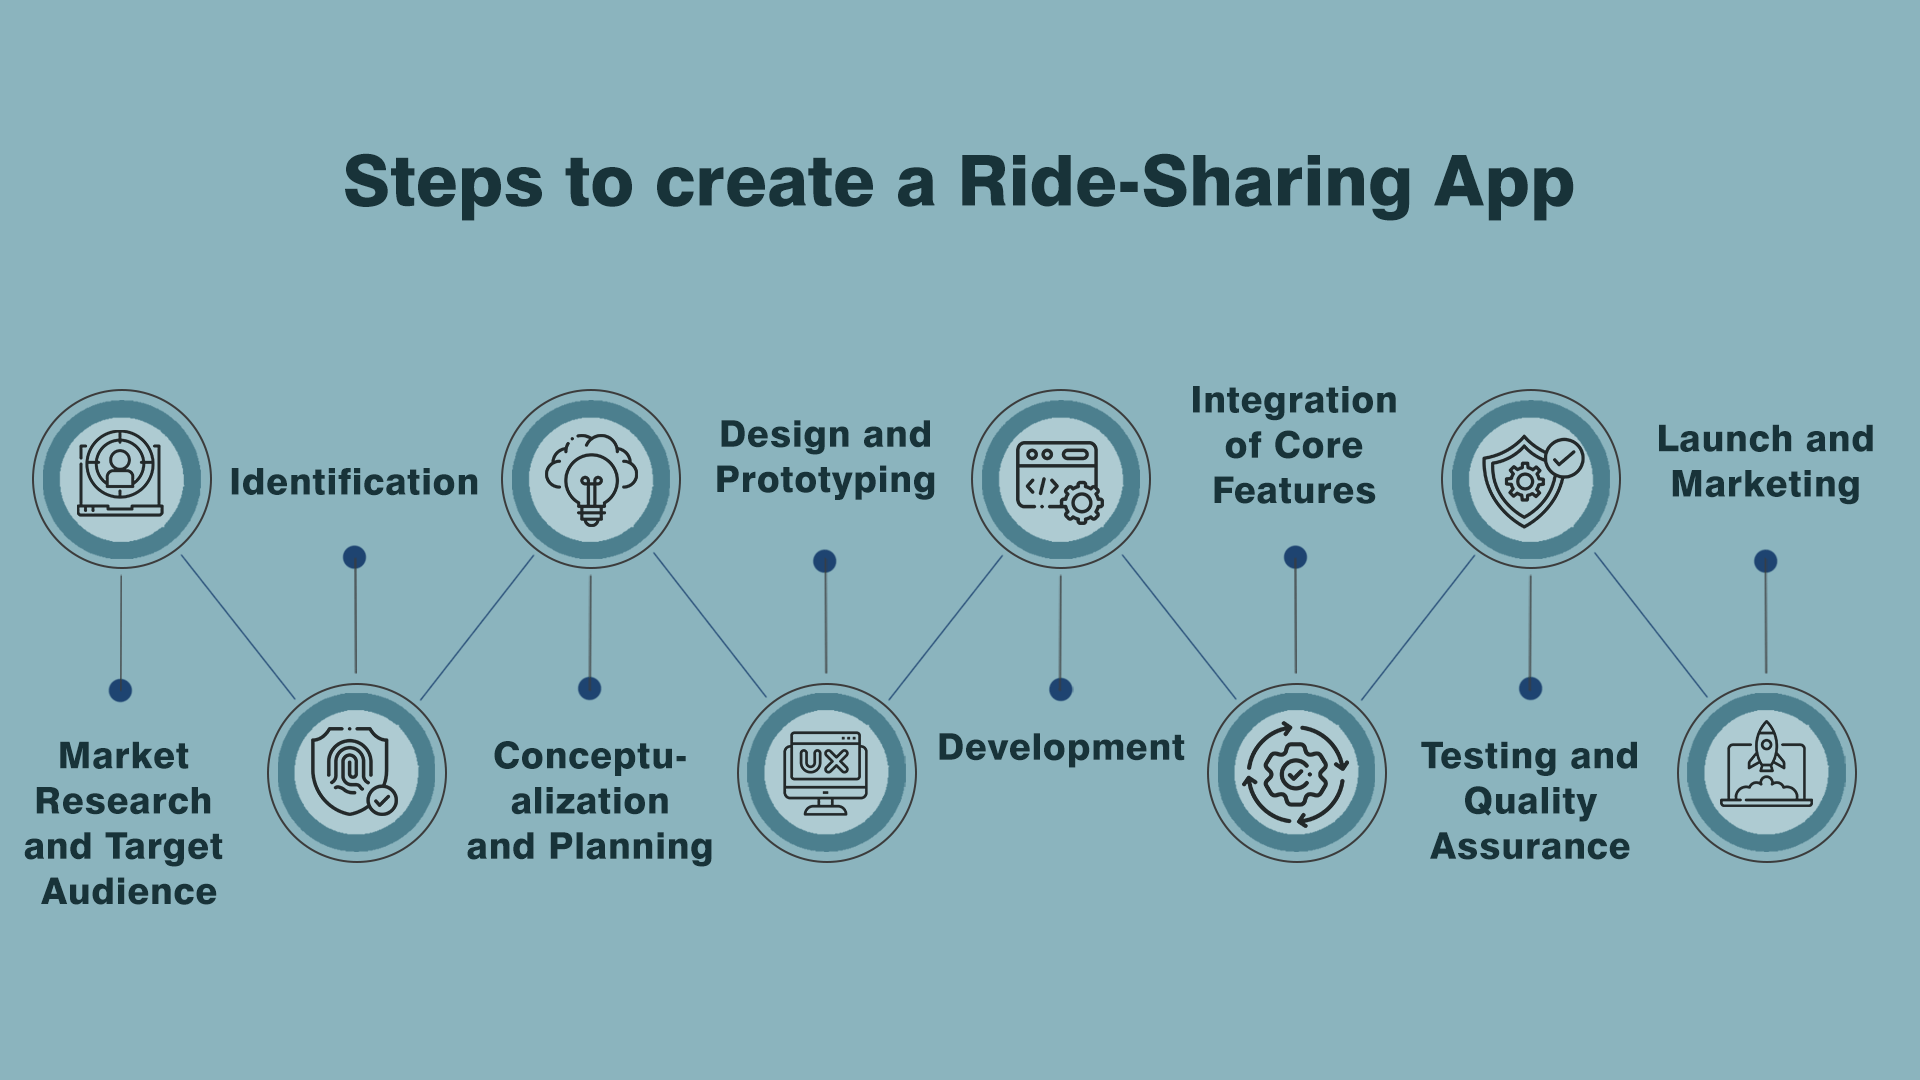 Steps to create a Ride-Sharing App